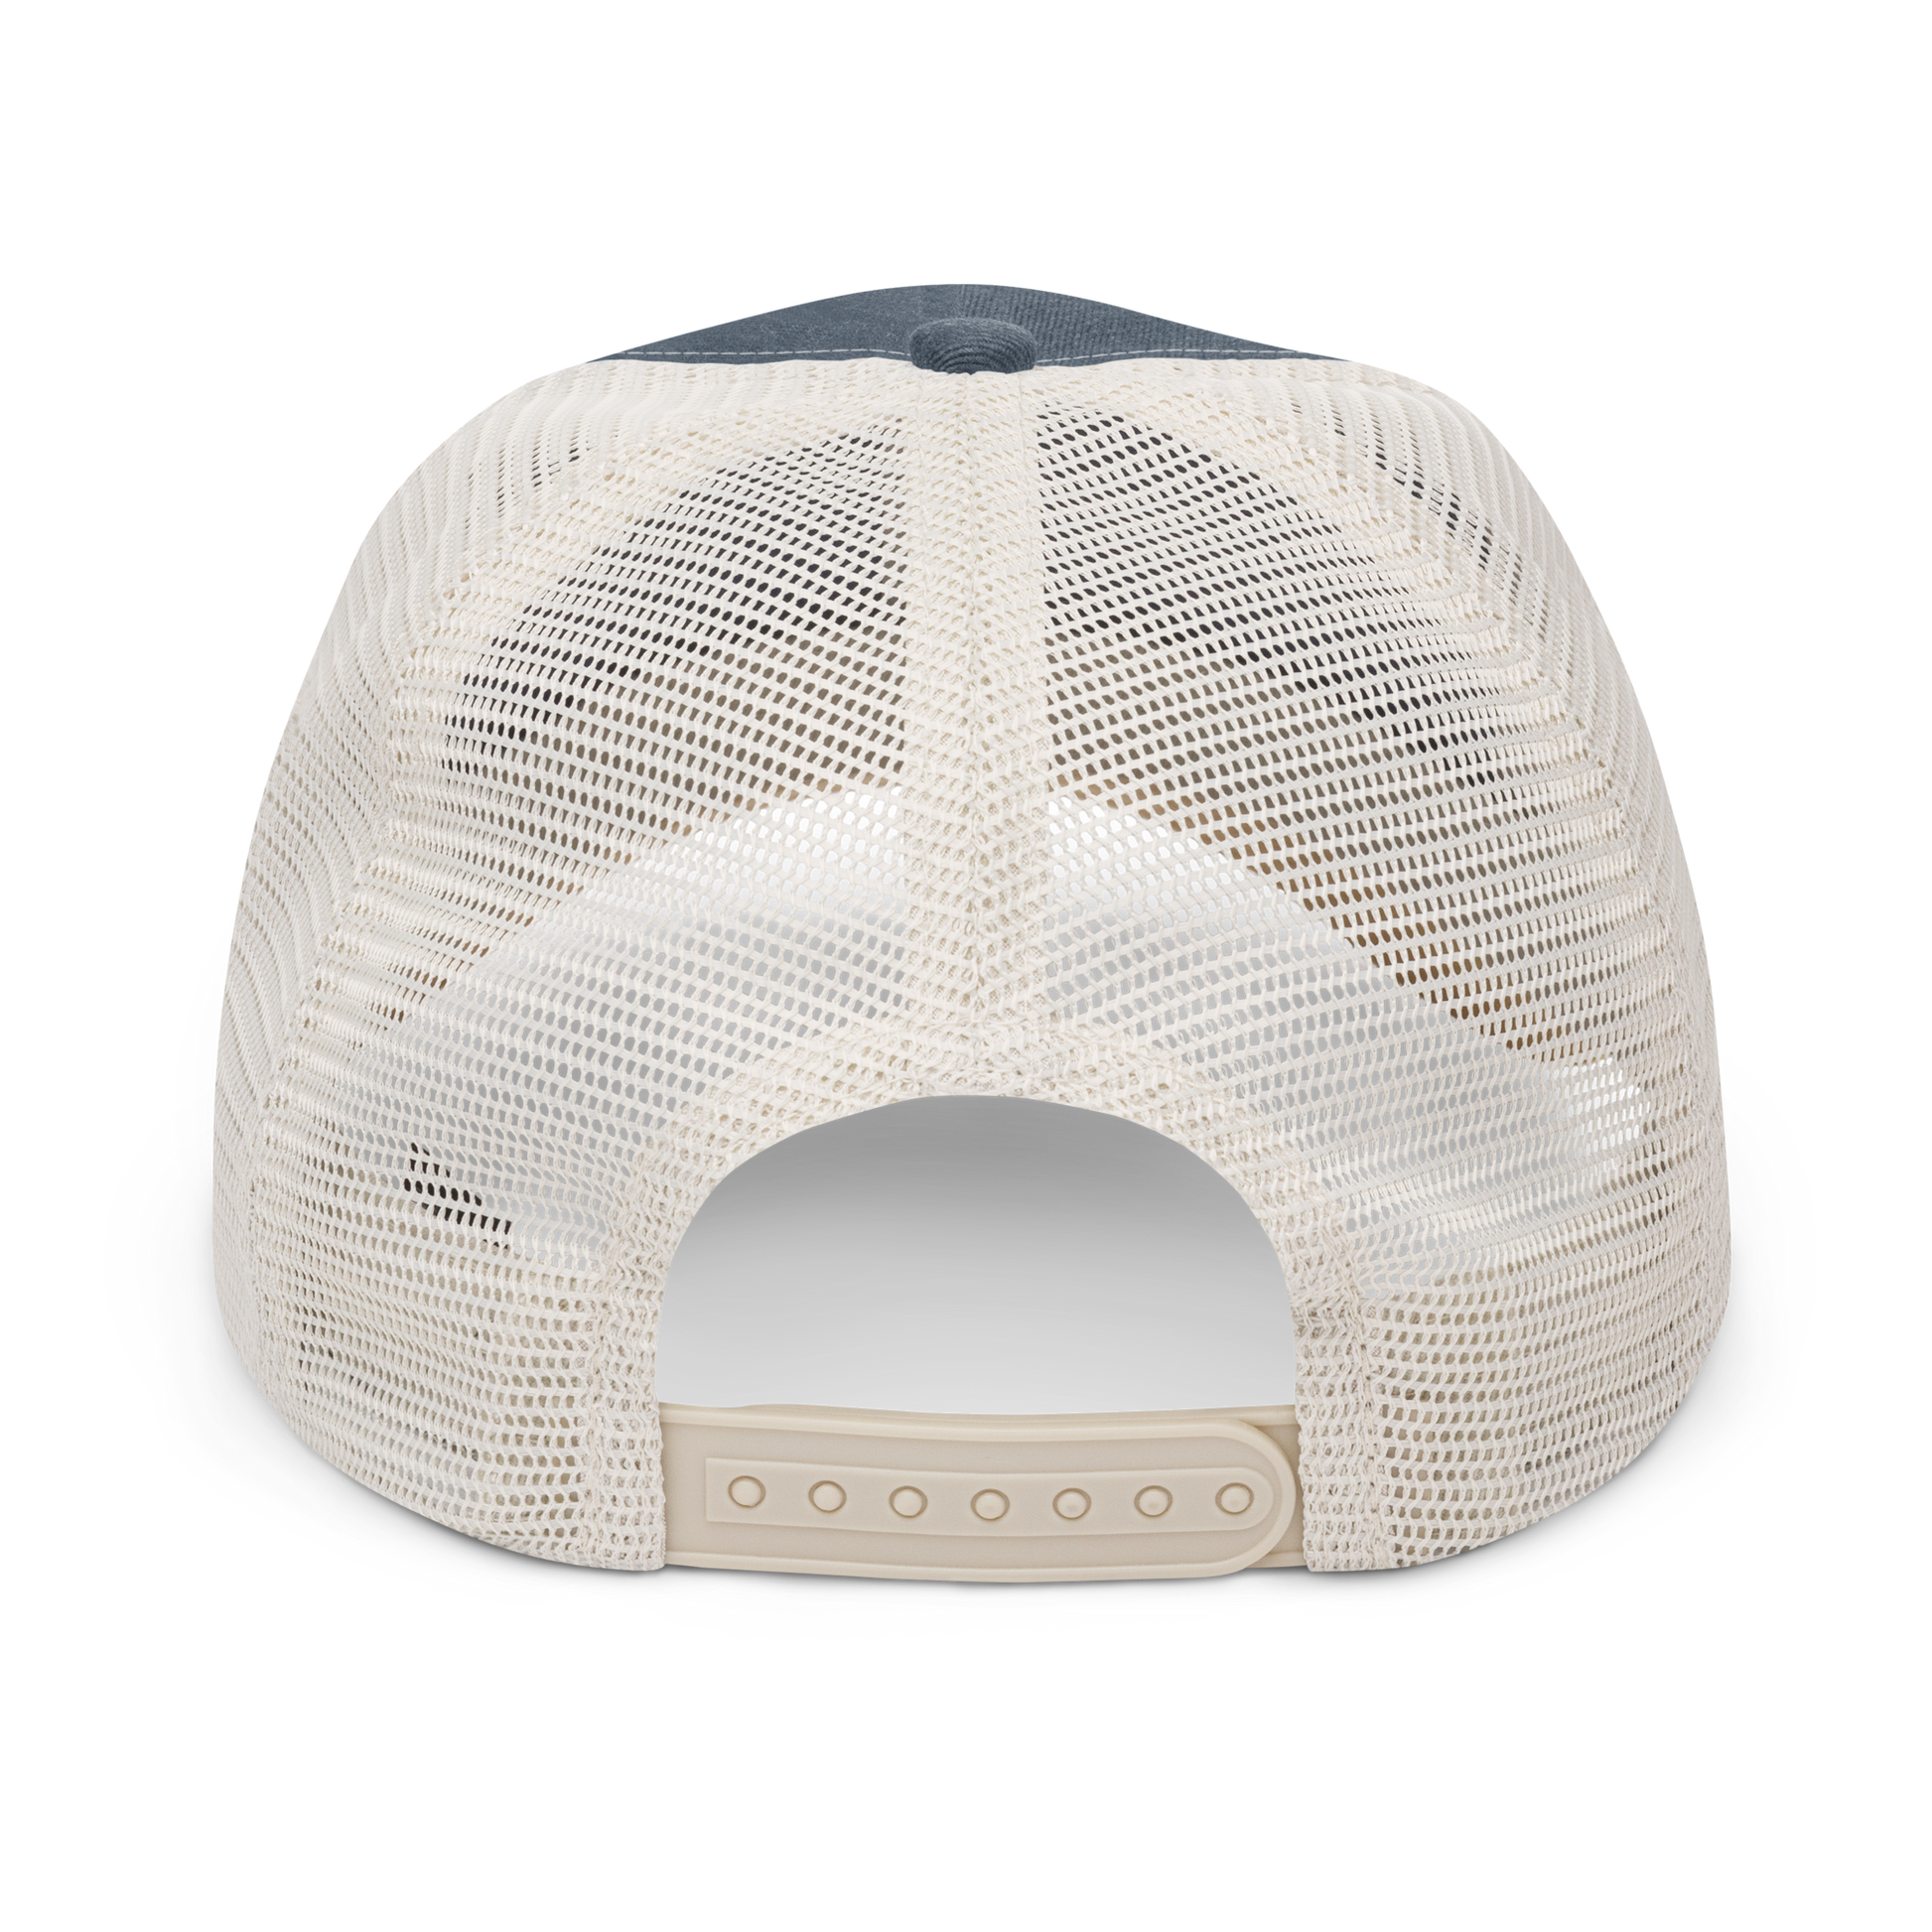 YHM Designs - YLW Kelowna Pigment-Dyed Trucker Cap - Crossed-X Design with Airport Code and Vintage Propliner - White Embroidery - Image 17